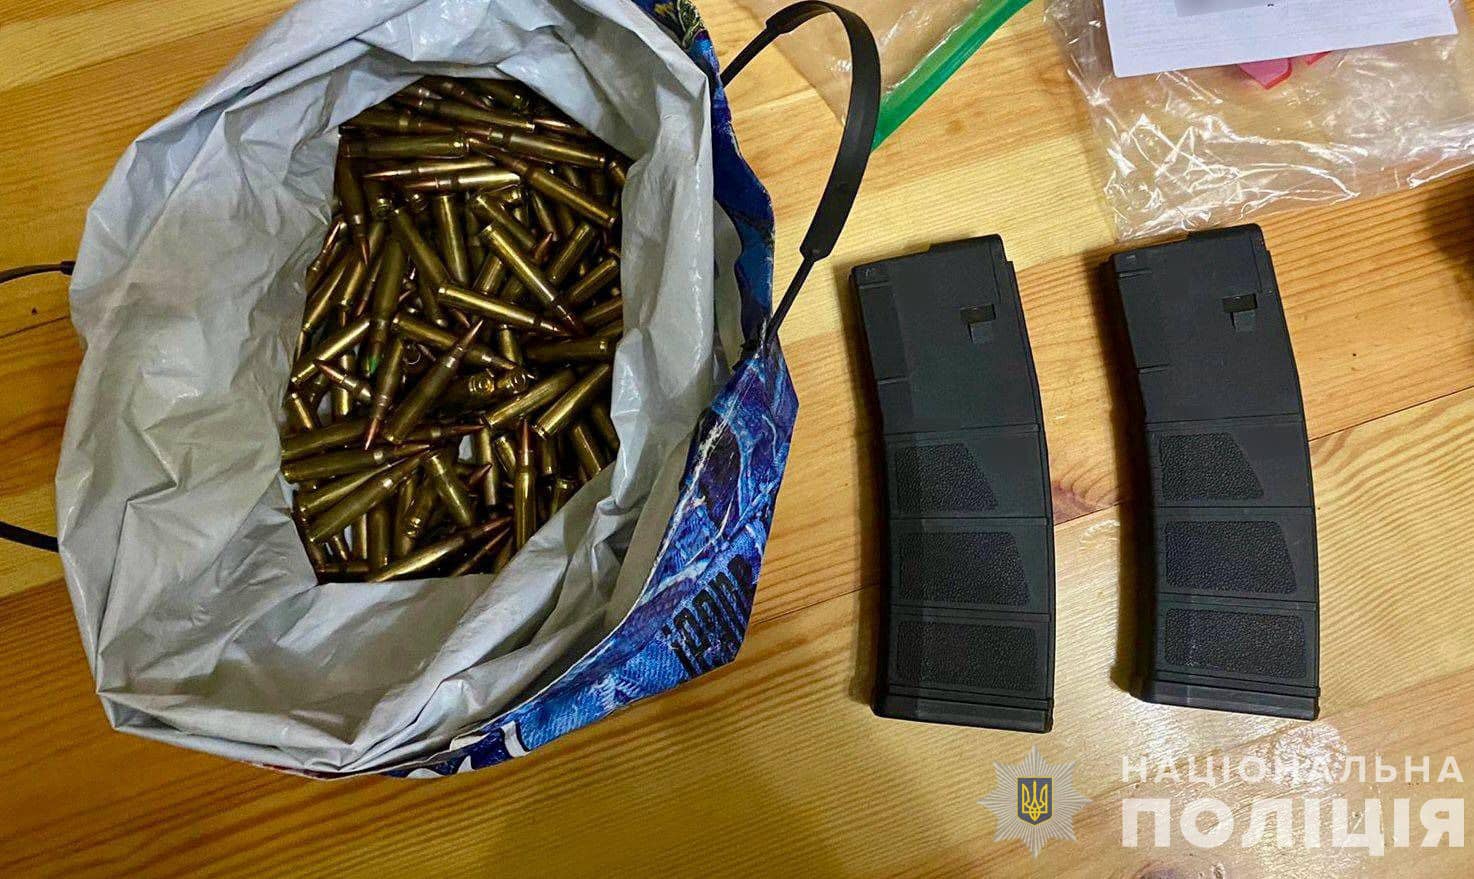 In Khust, the police seized grenades and more than 800 rounds of ammunition from illicit trafficking.